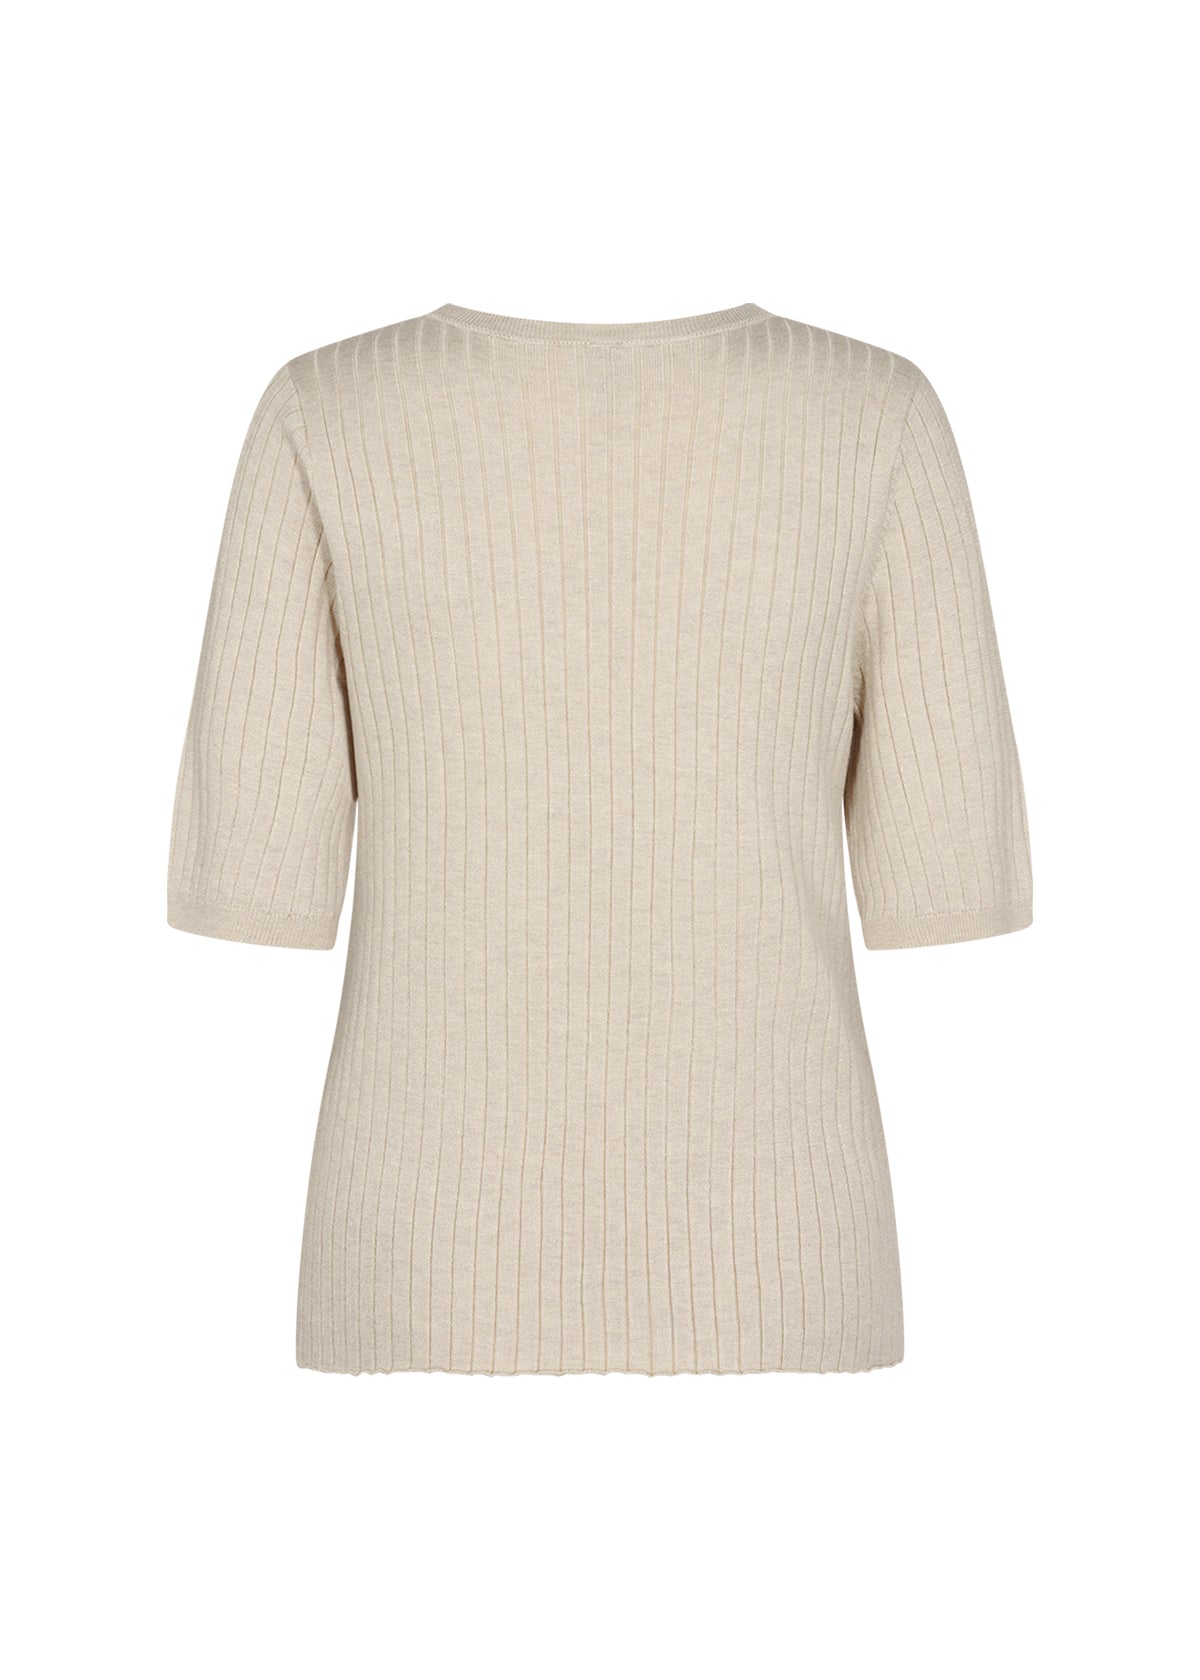 Soya Concept ribbed sweater